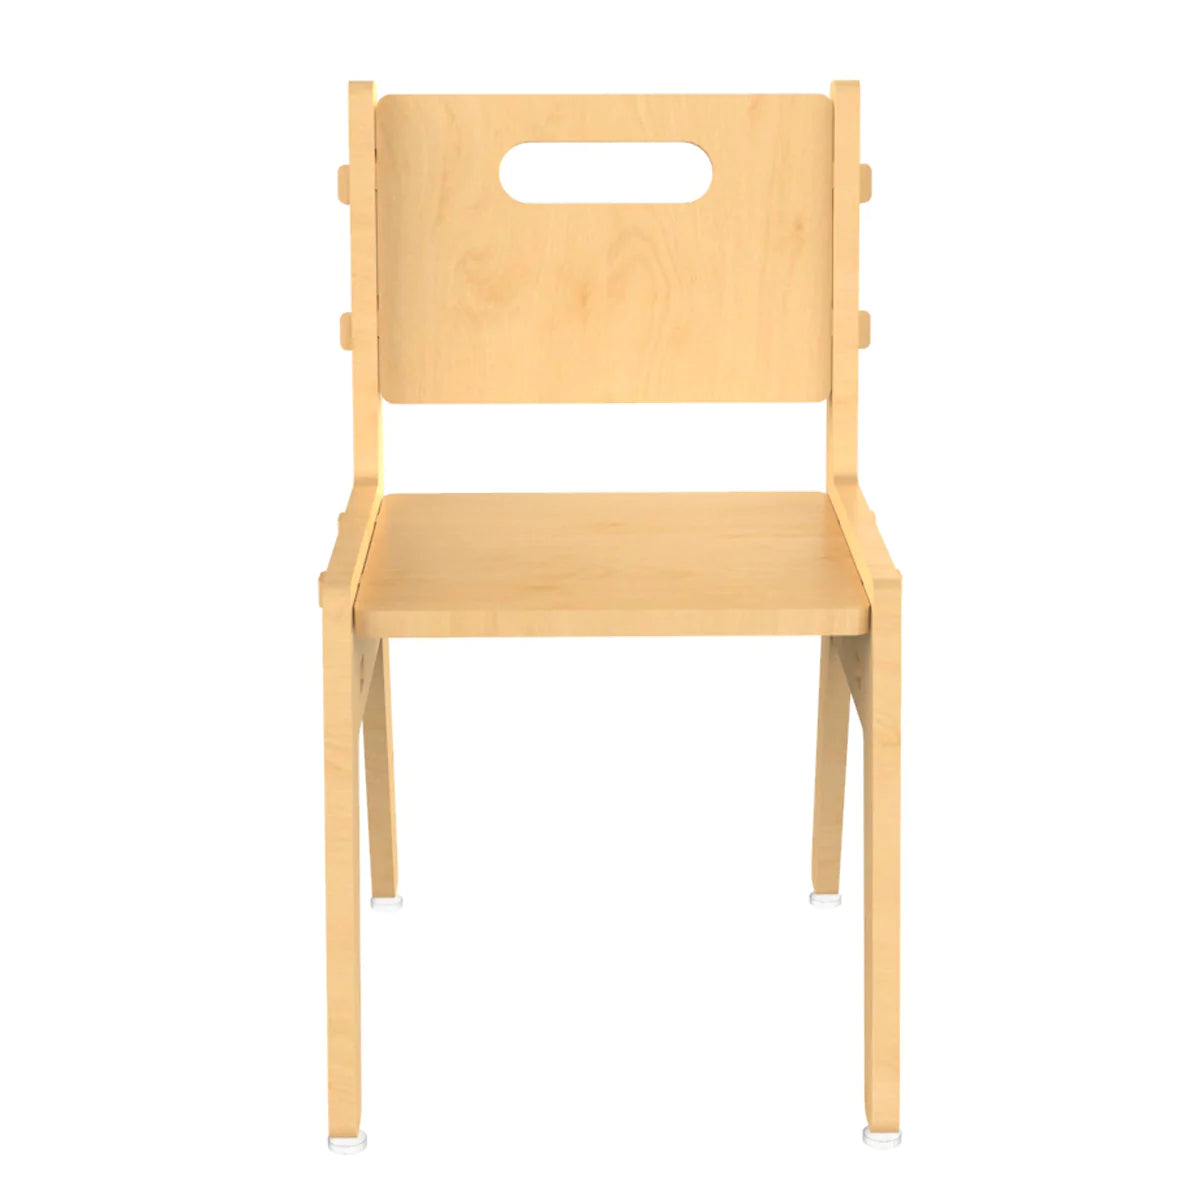 Buy Silver Peach  Wooden Chair - Natural - Front View - SkilloToys.com